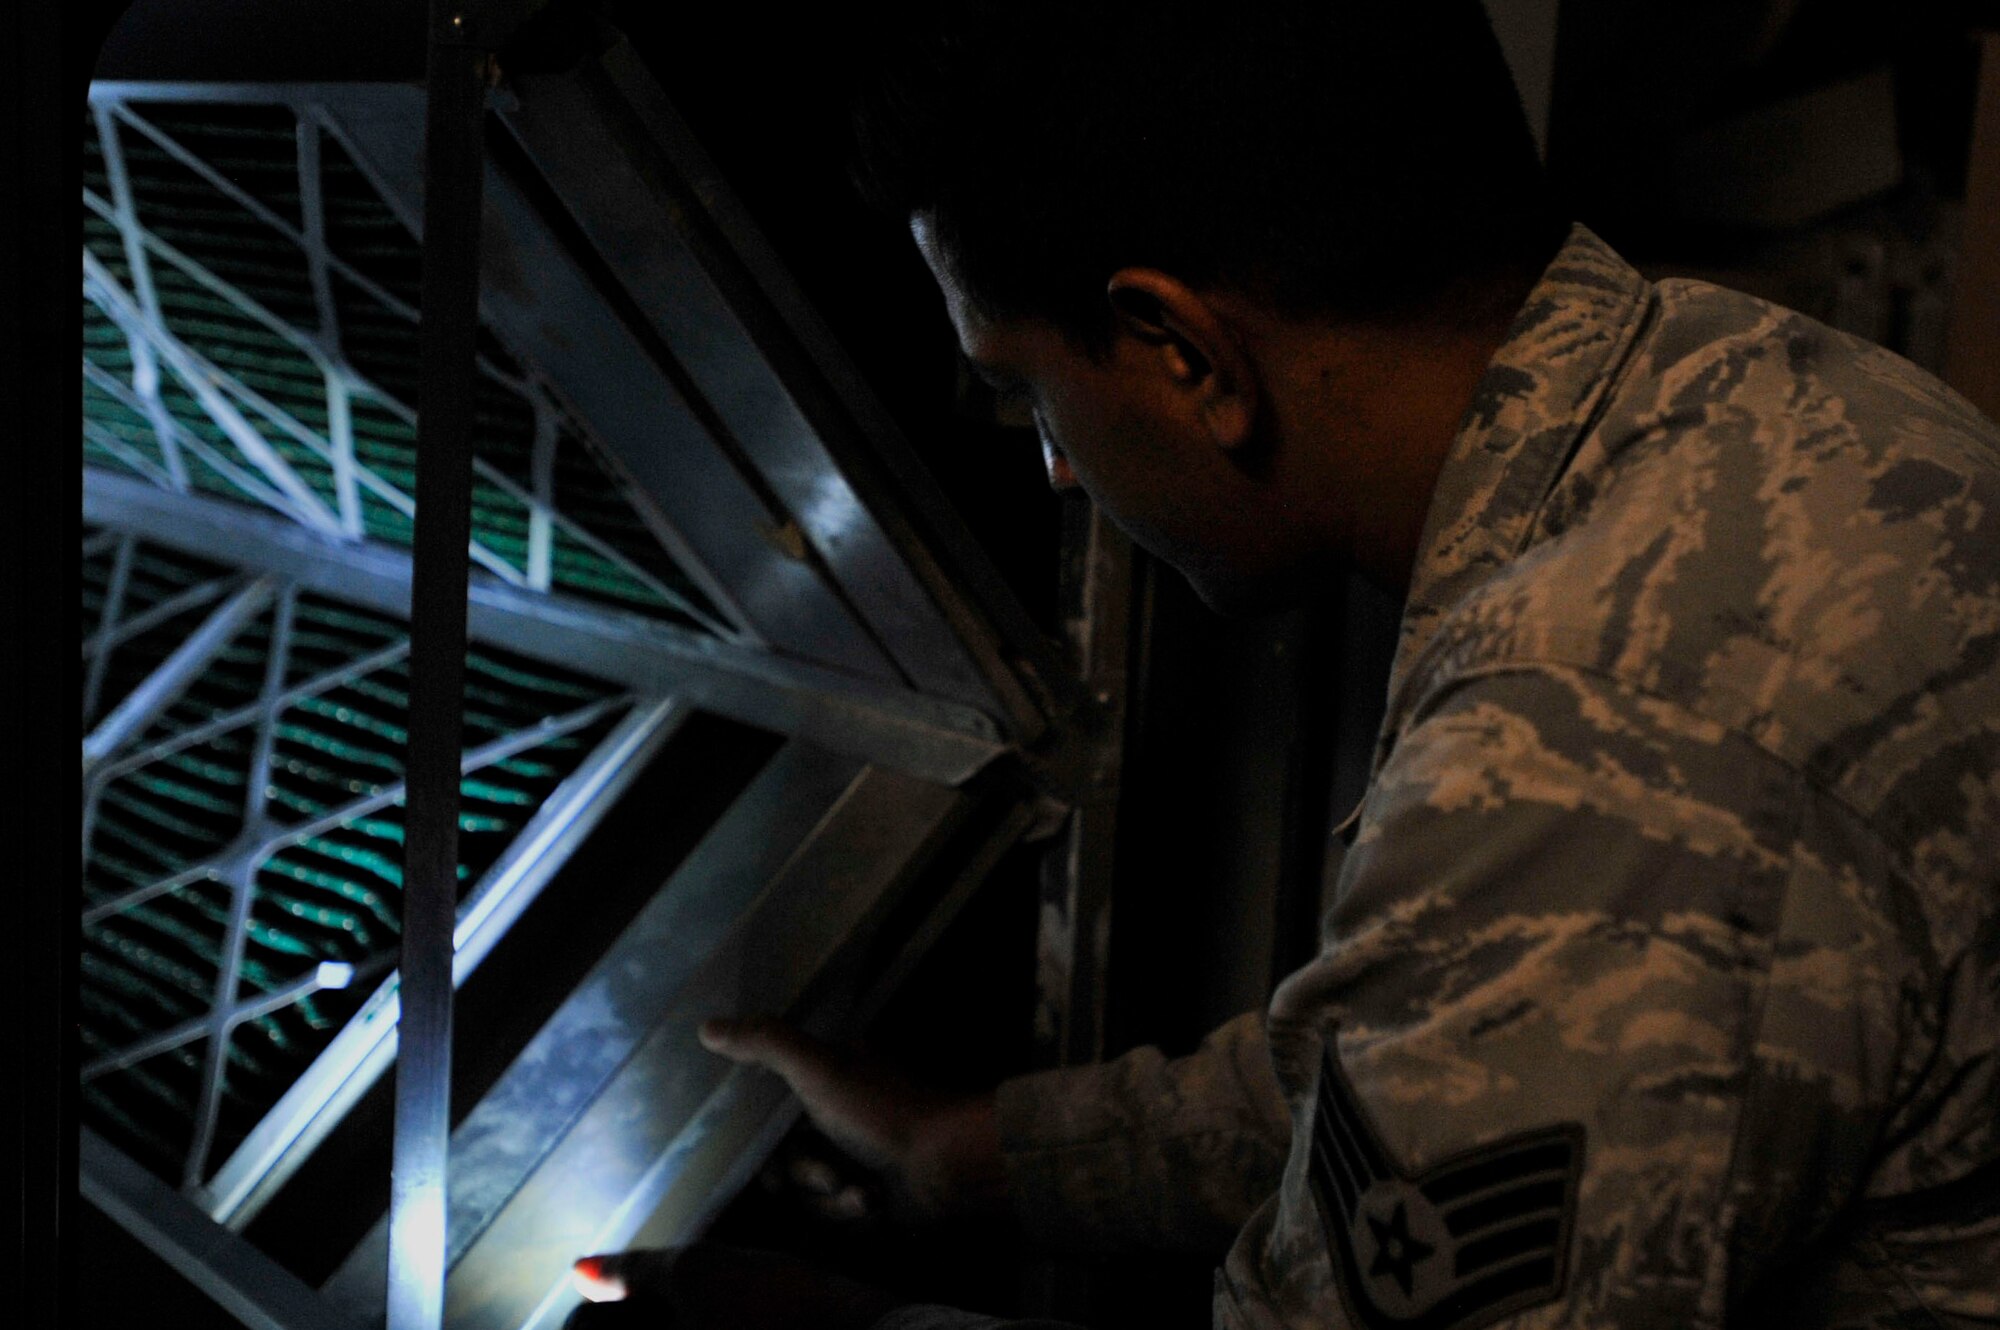 HVAC Airmen solve maintenance problems through use of wiring, schematic drawings and analyzing construction.